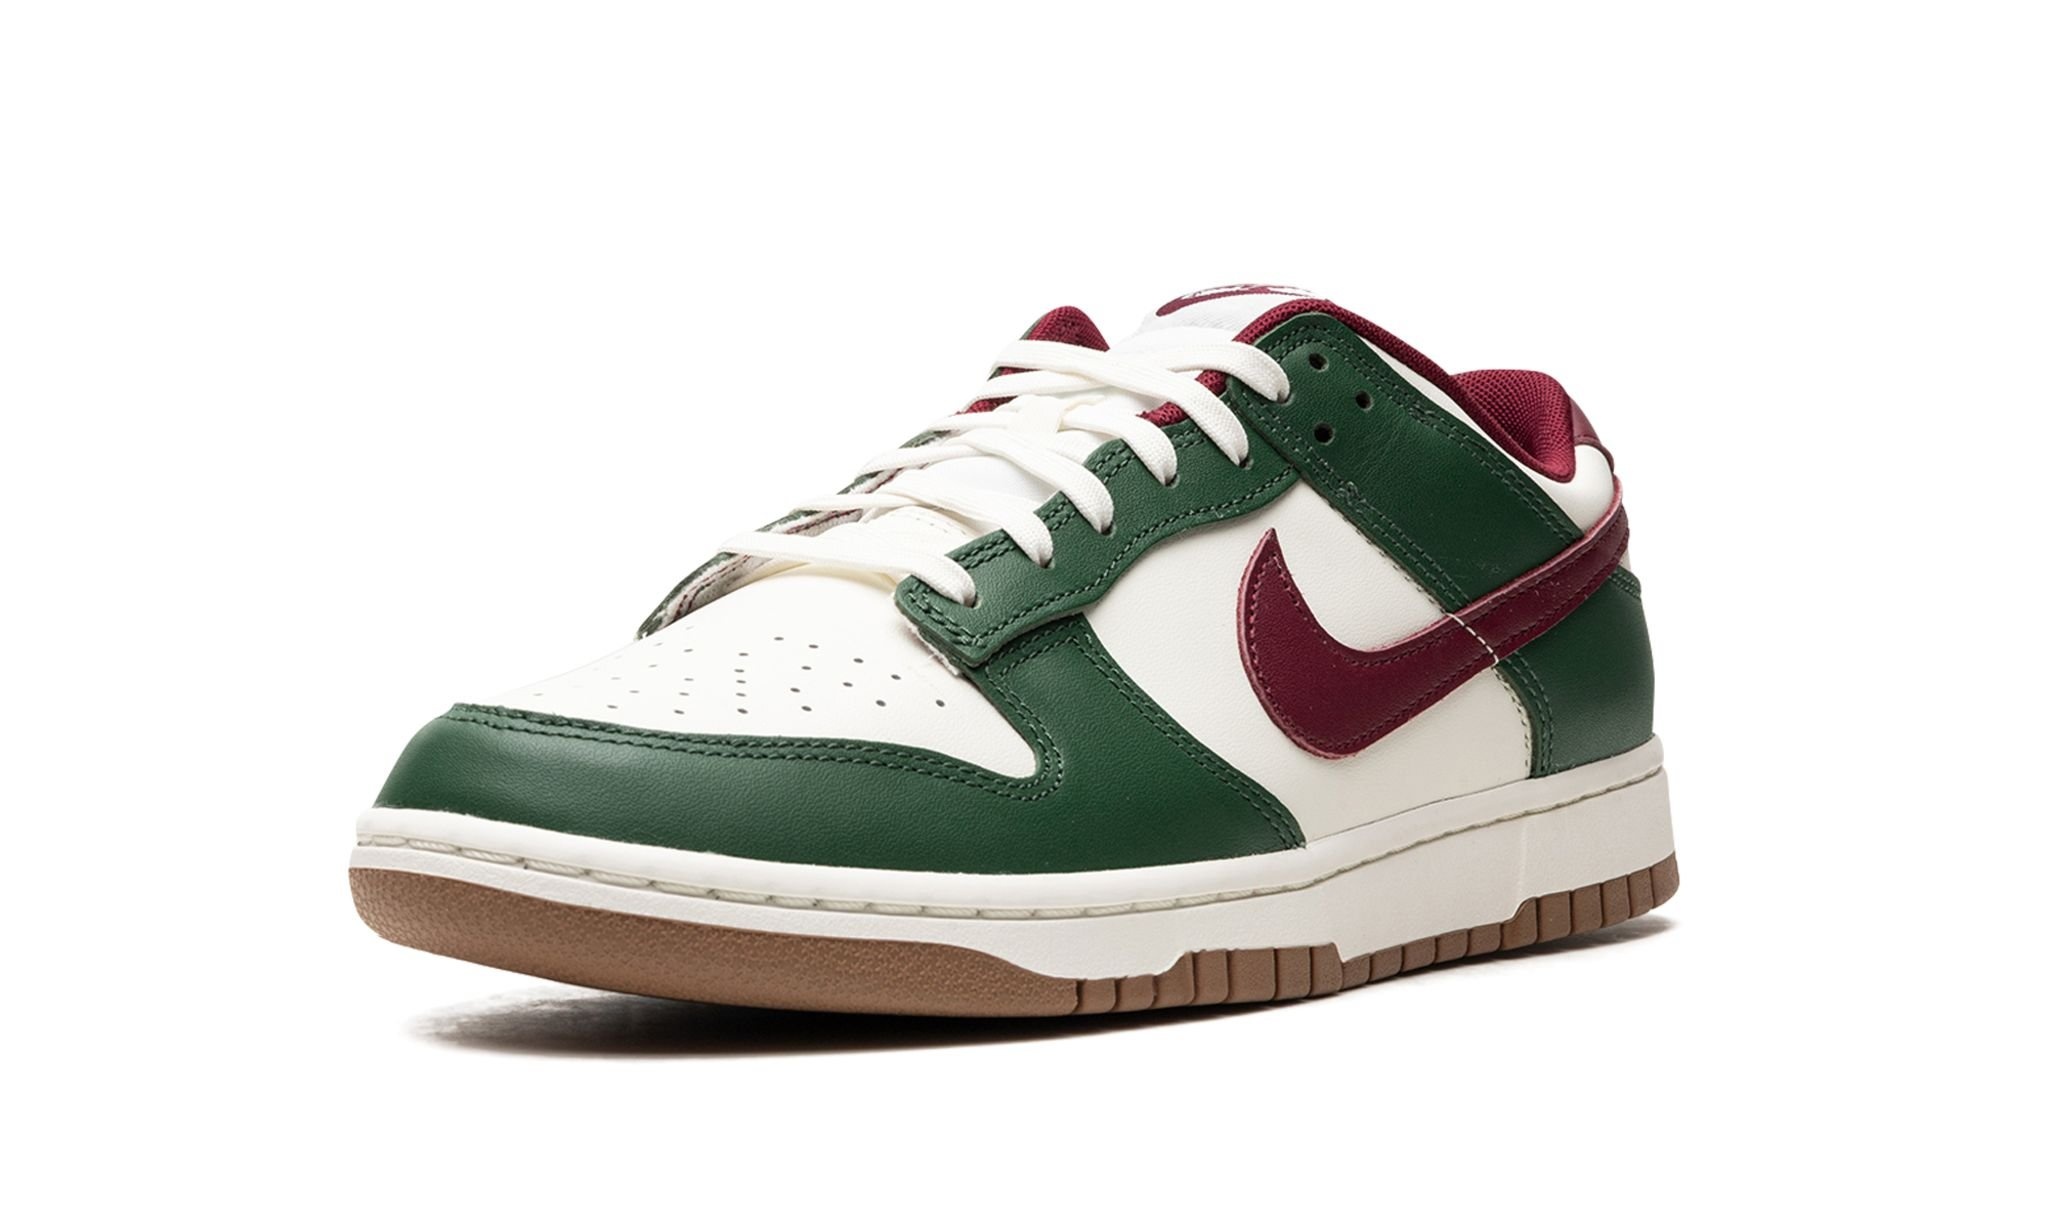 Dunk Low Retro "Gorge Green / Team Red" - 4